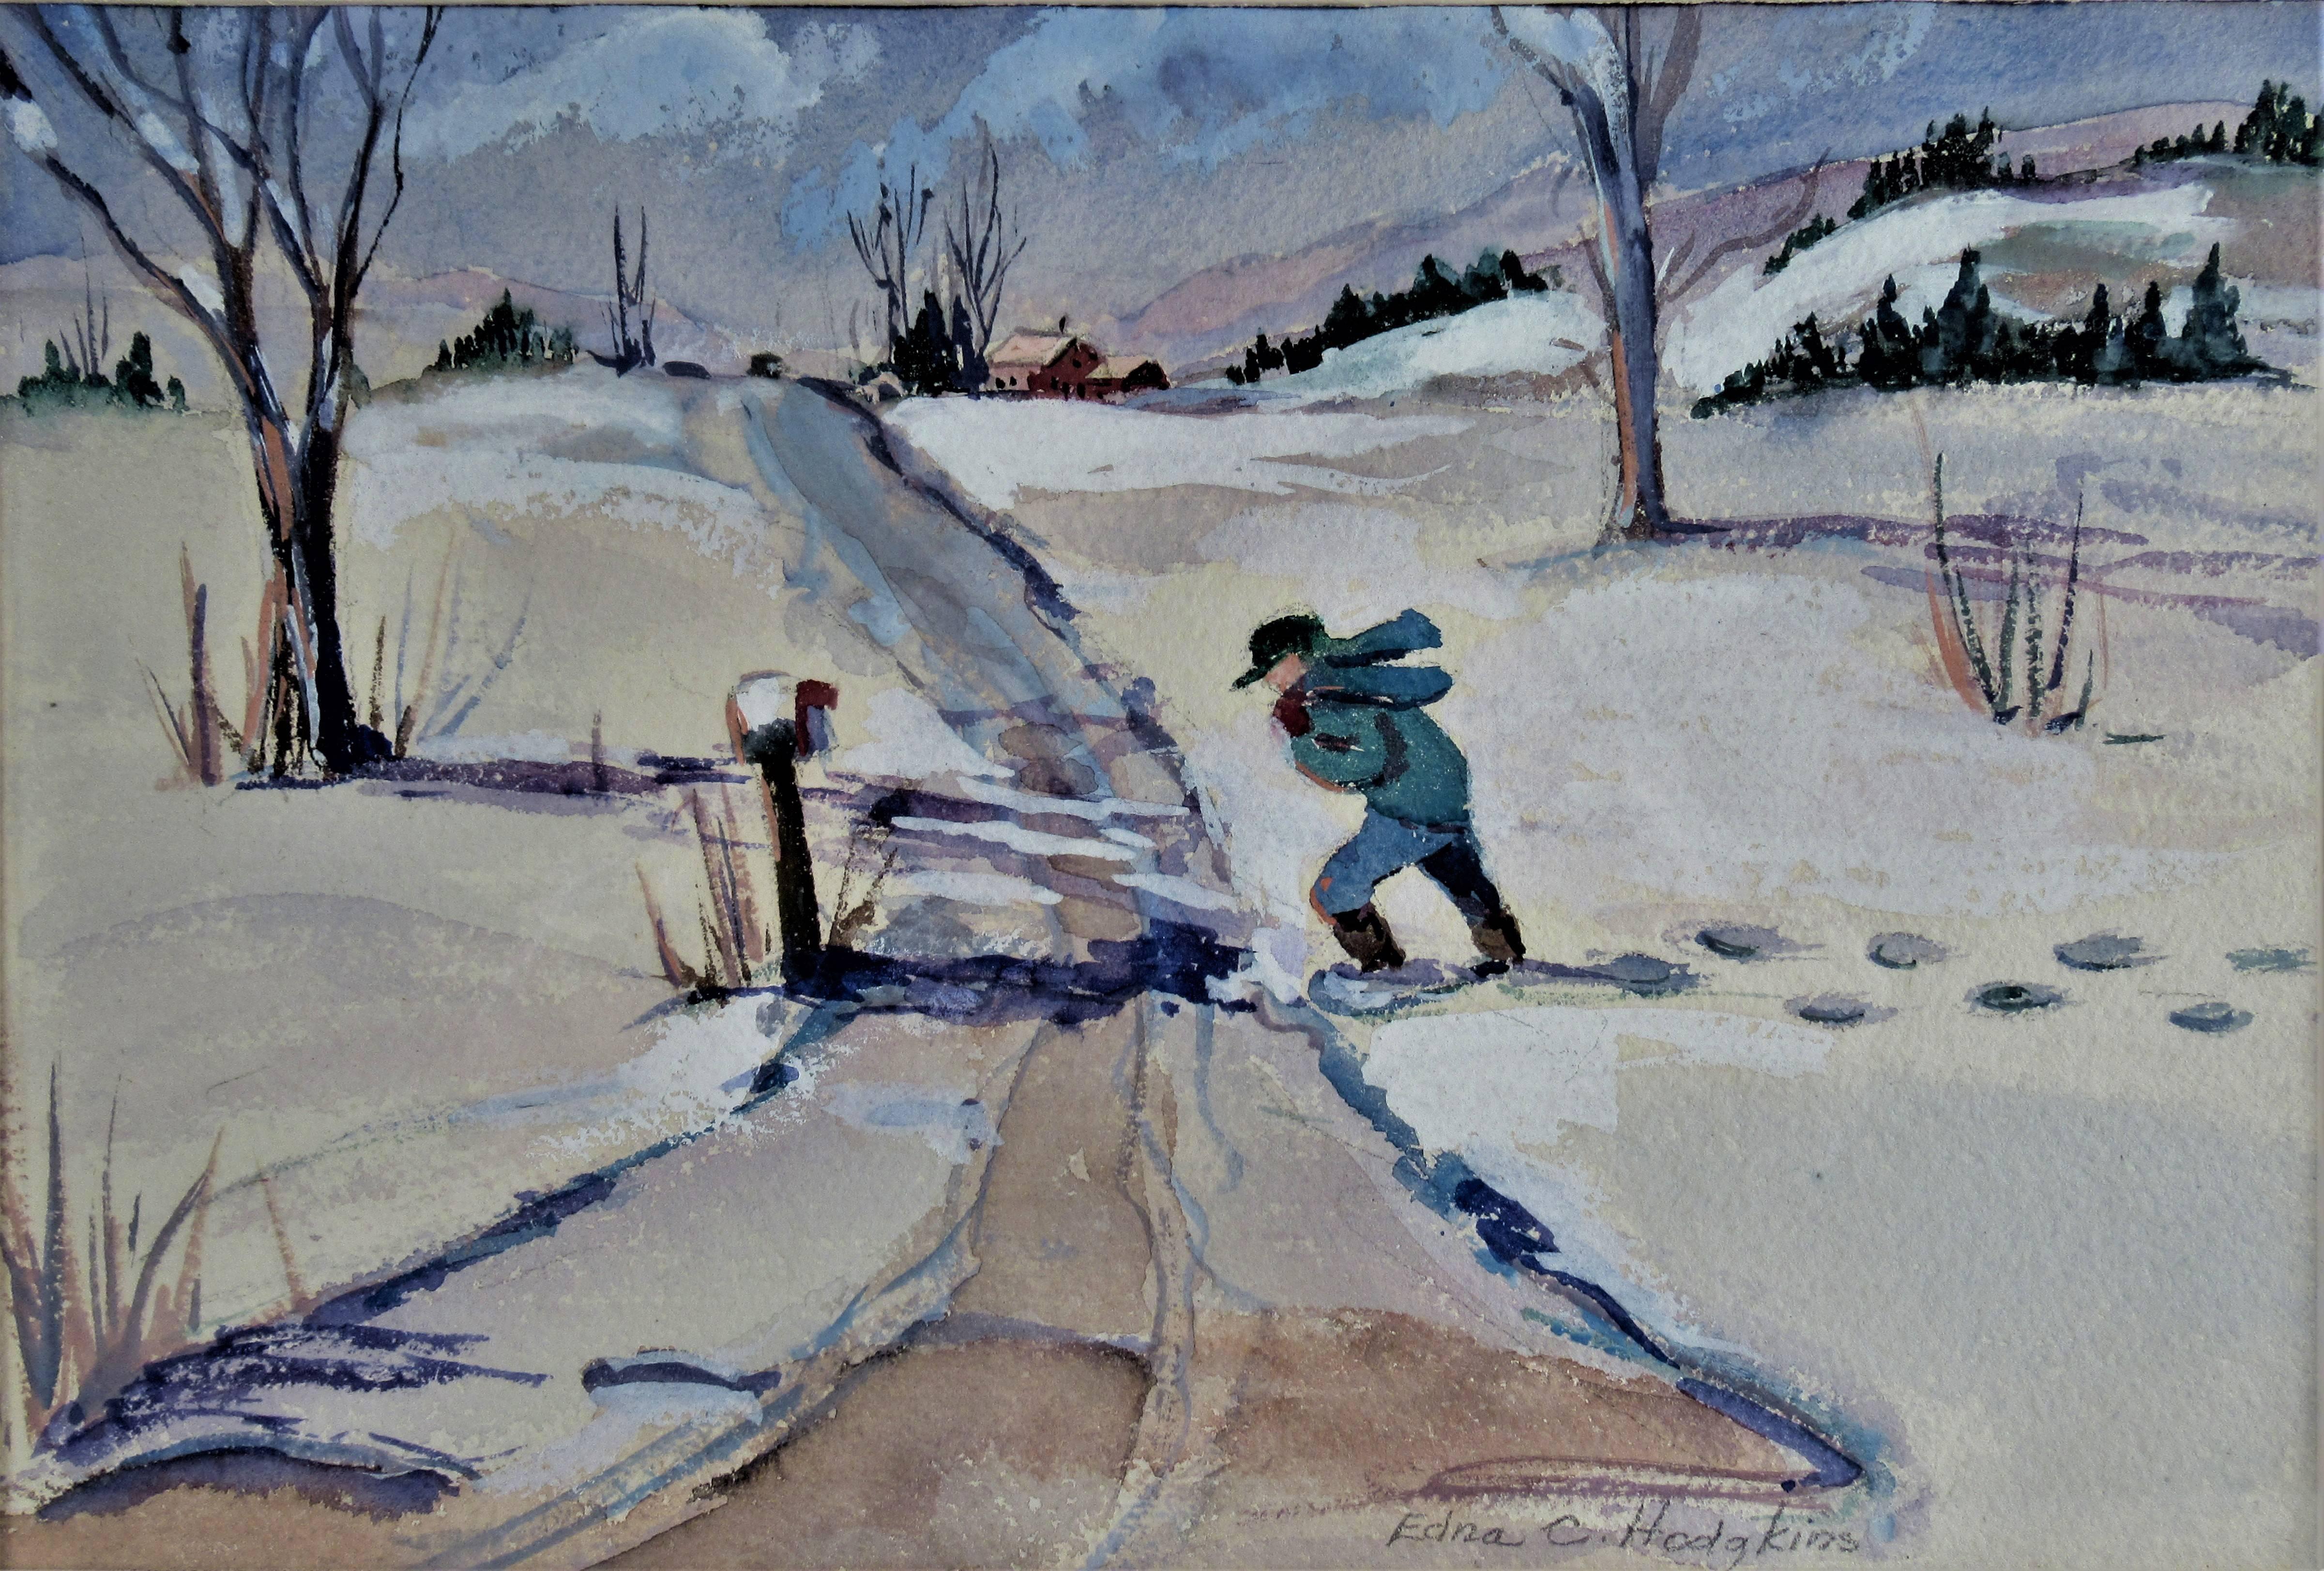 Getting the Mail - Art by Edna Choate Hodgkins